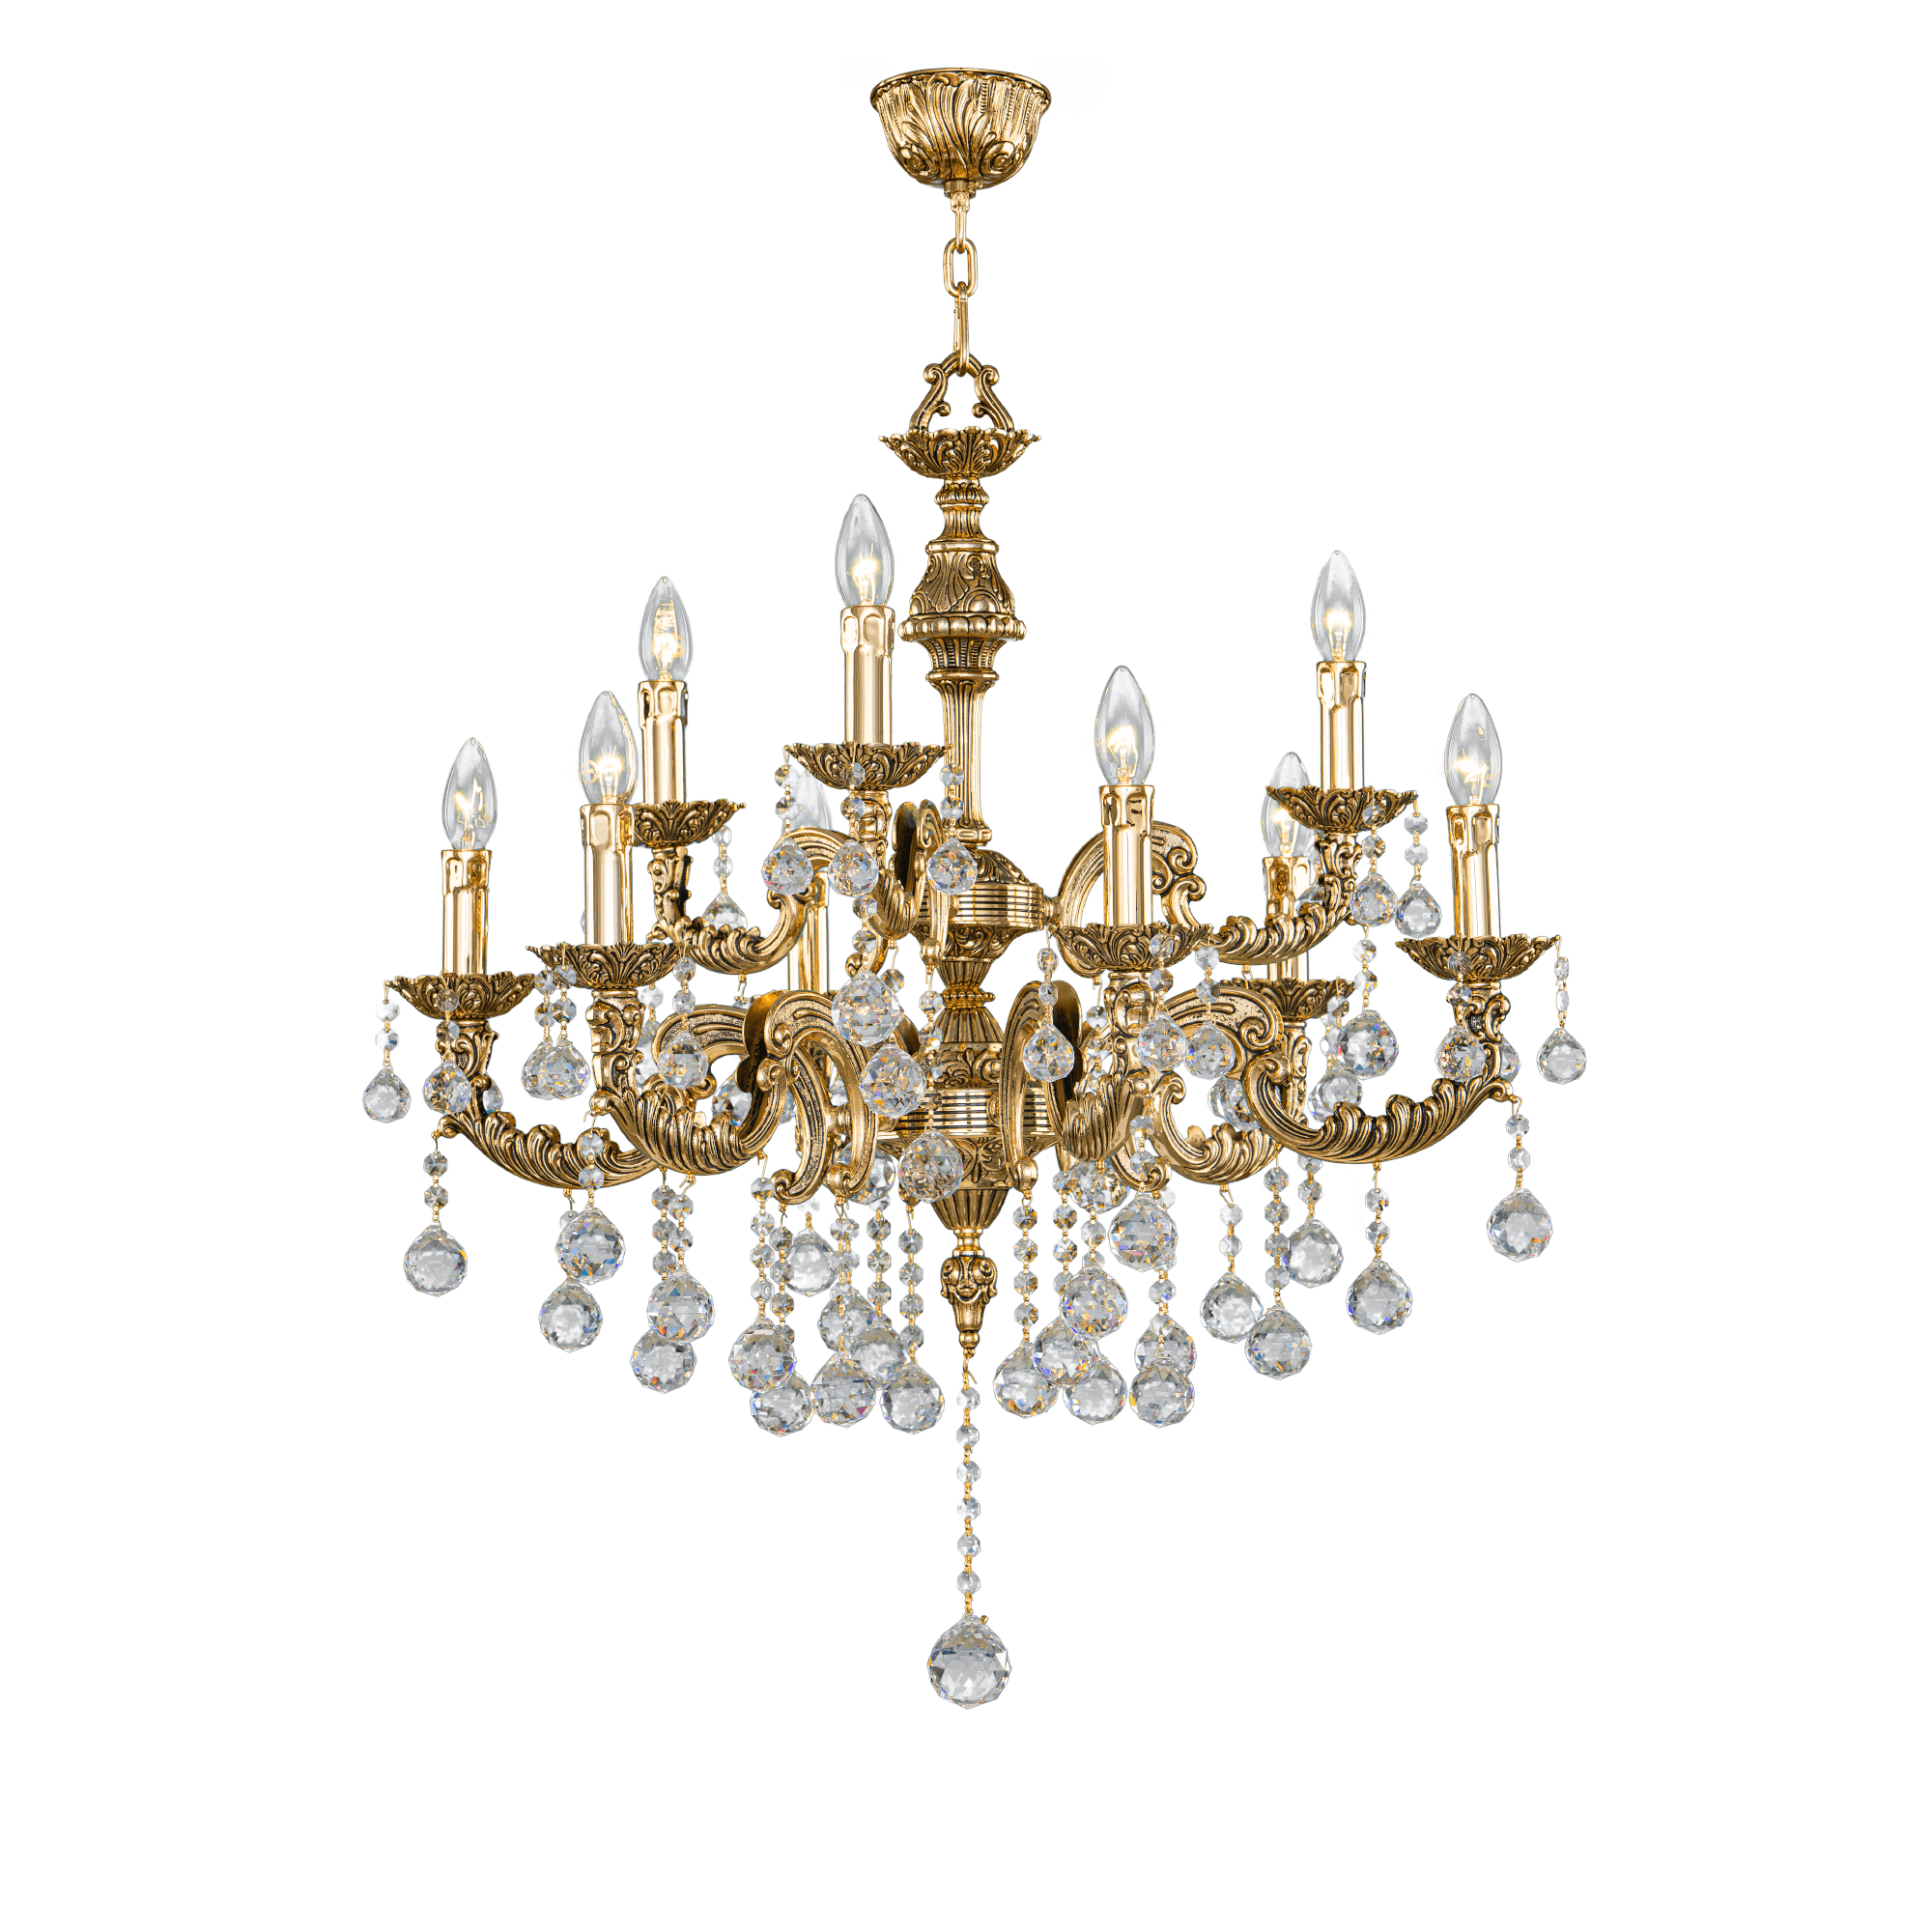 Asfour-Crystal-Lighting-Brass-Collection-Brass-Chandelier-9-Bulbs-Gold-Ox